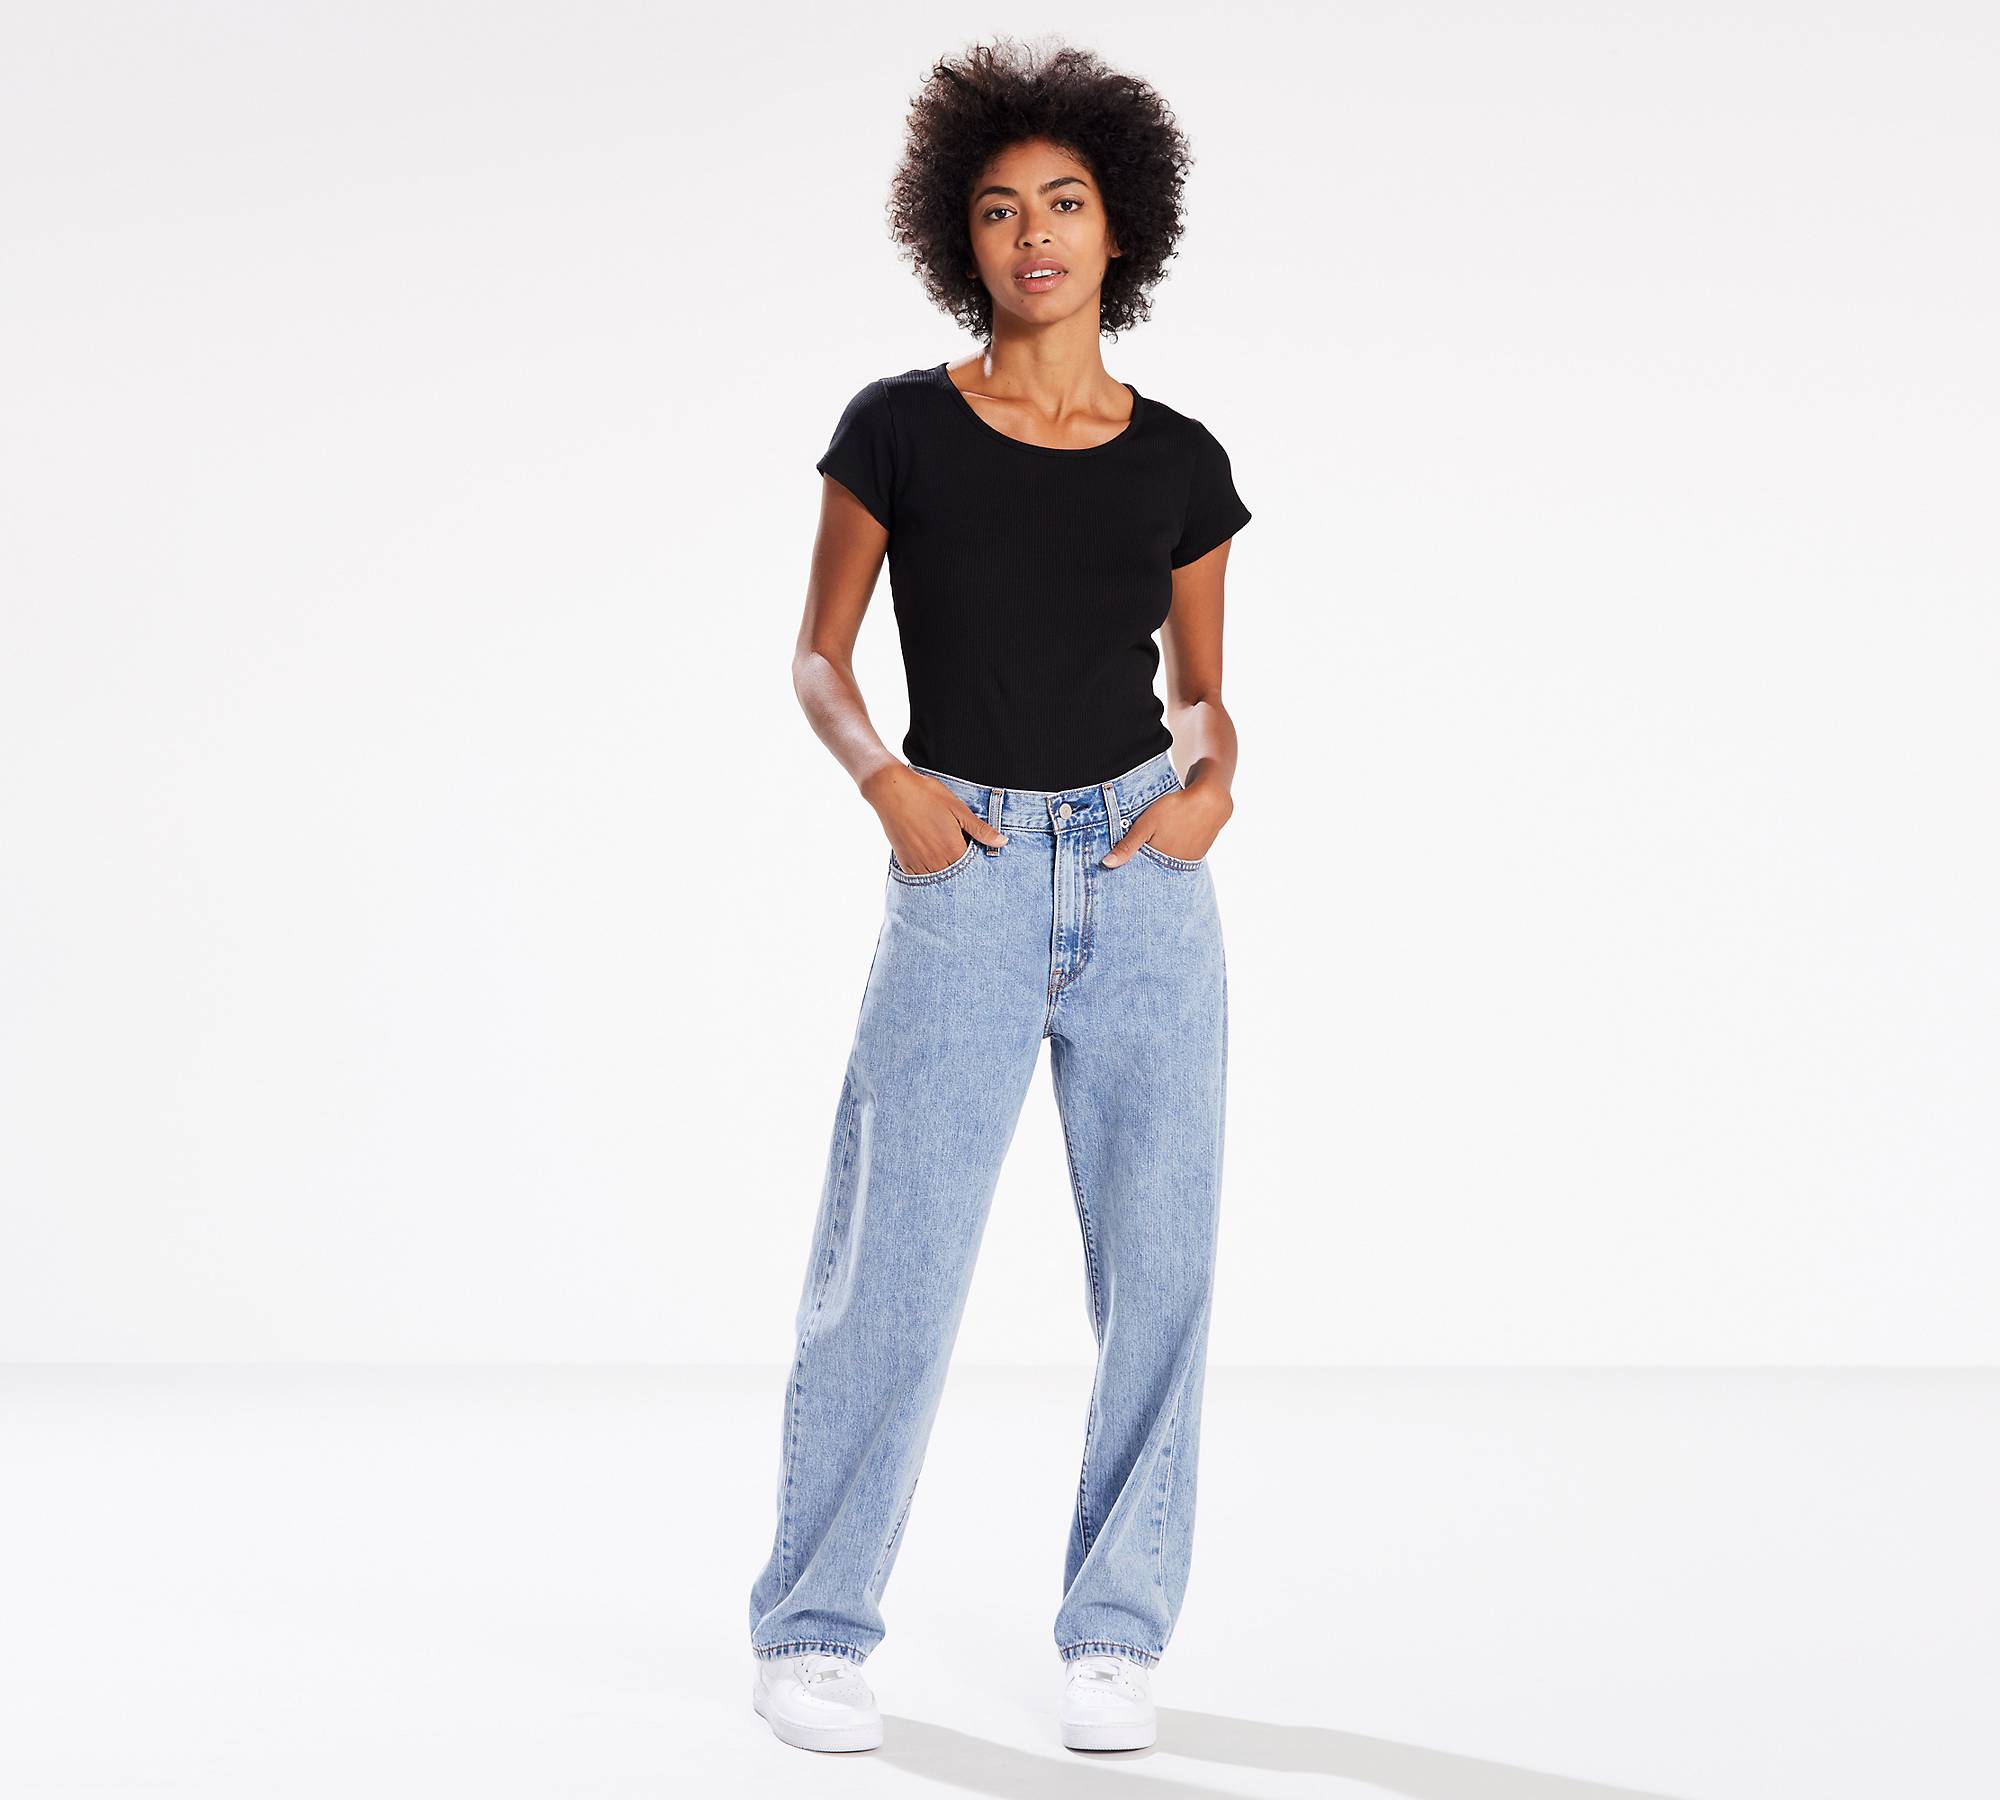 9:45 tired Tremble Baggy Women's Jeans - Light Wash | Levi's® CA